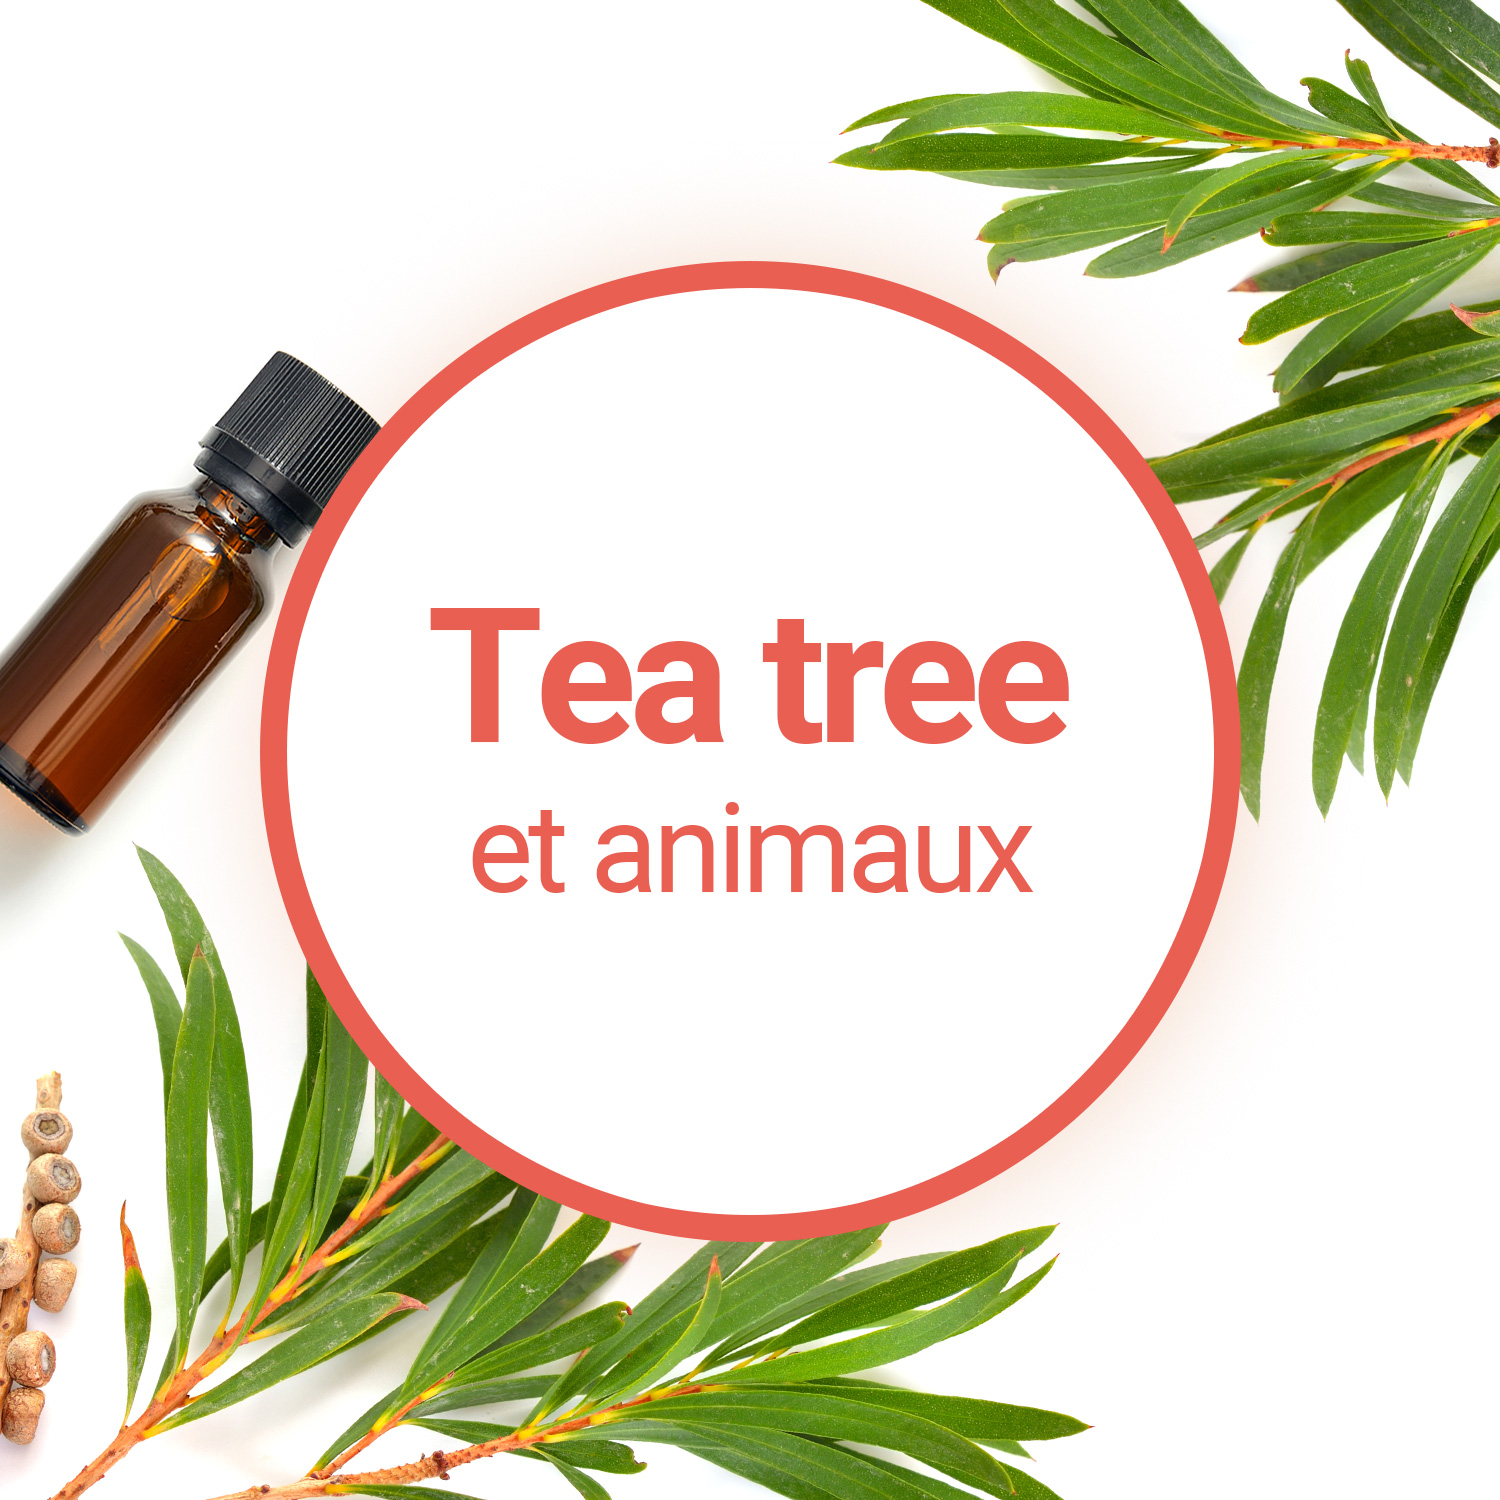 https://www.compagnie-des-sens.fr/img/cmscover/553/tea-tree-cocon-animaux.jpg